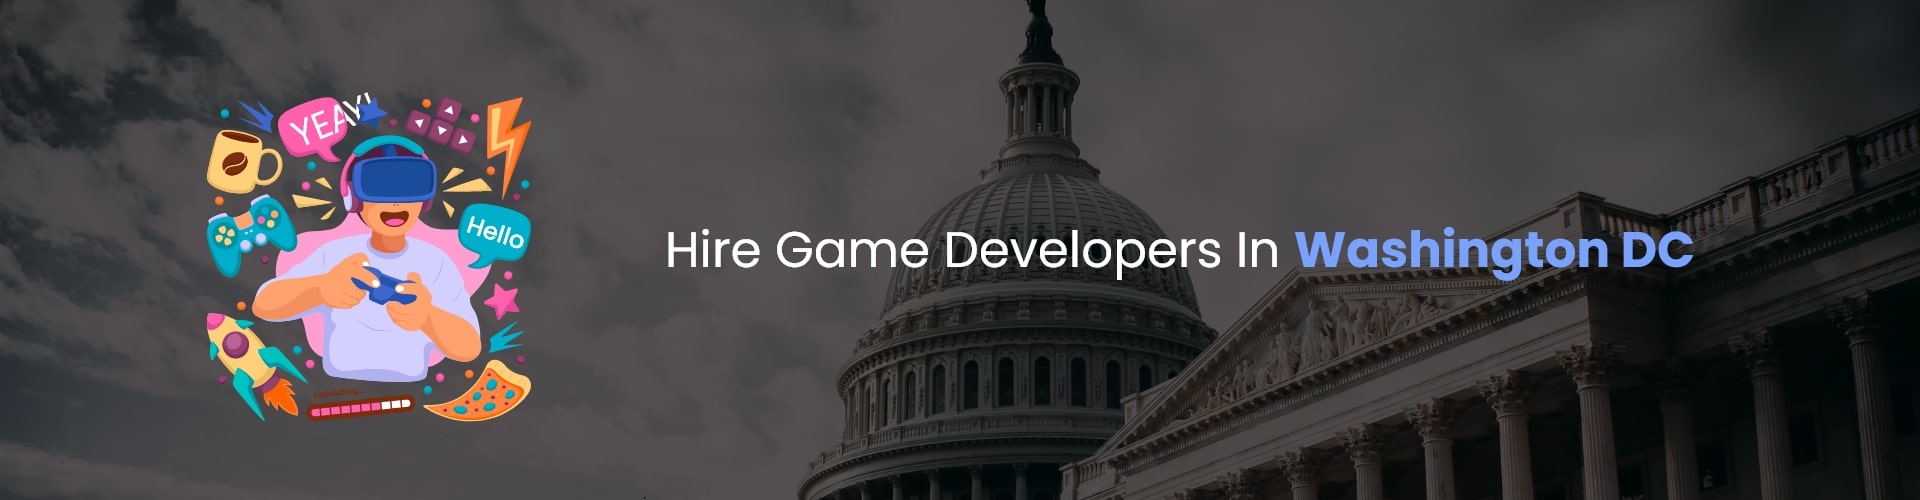 hire game developers in washington dc